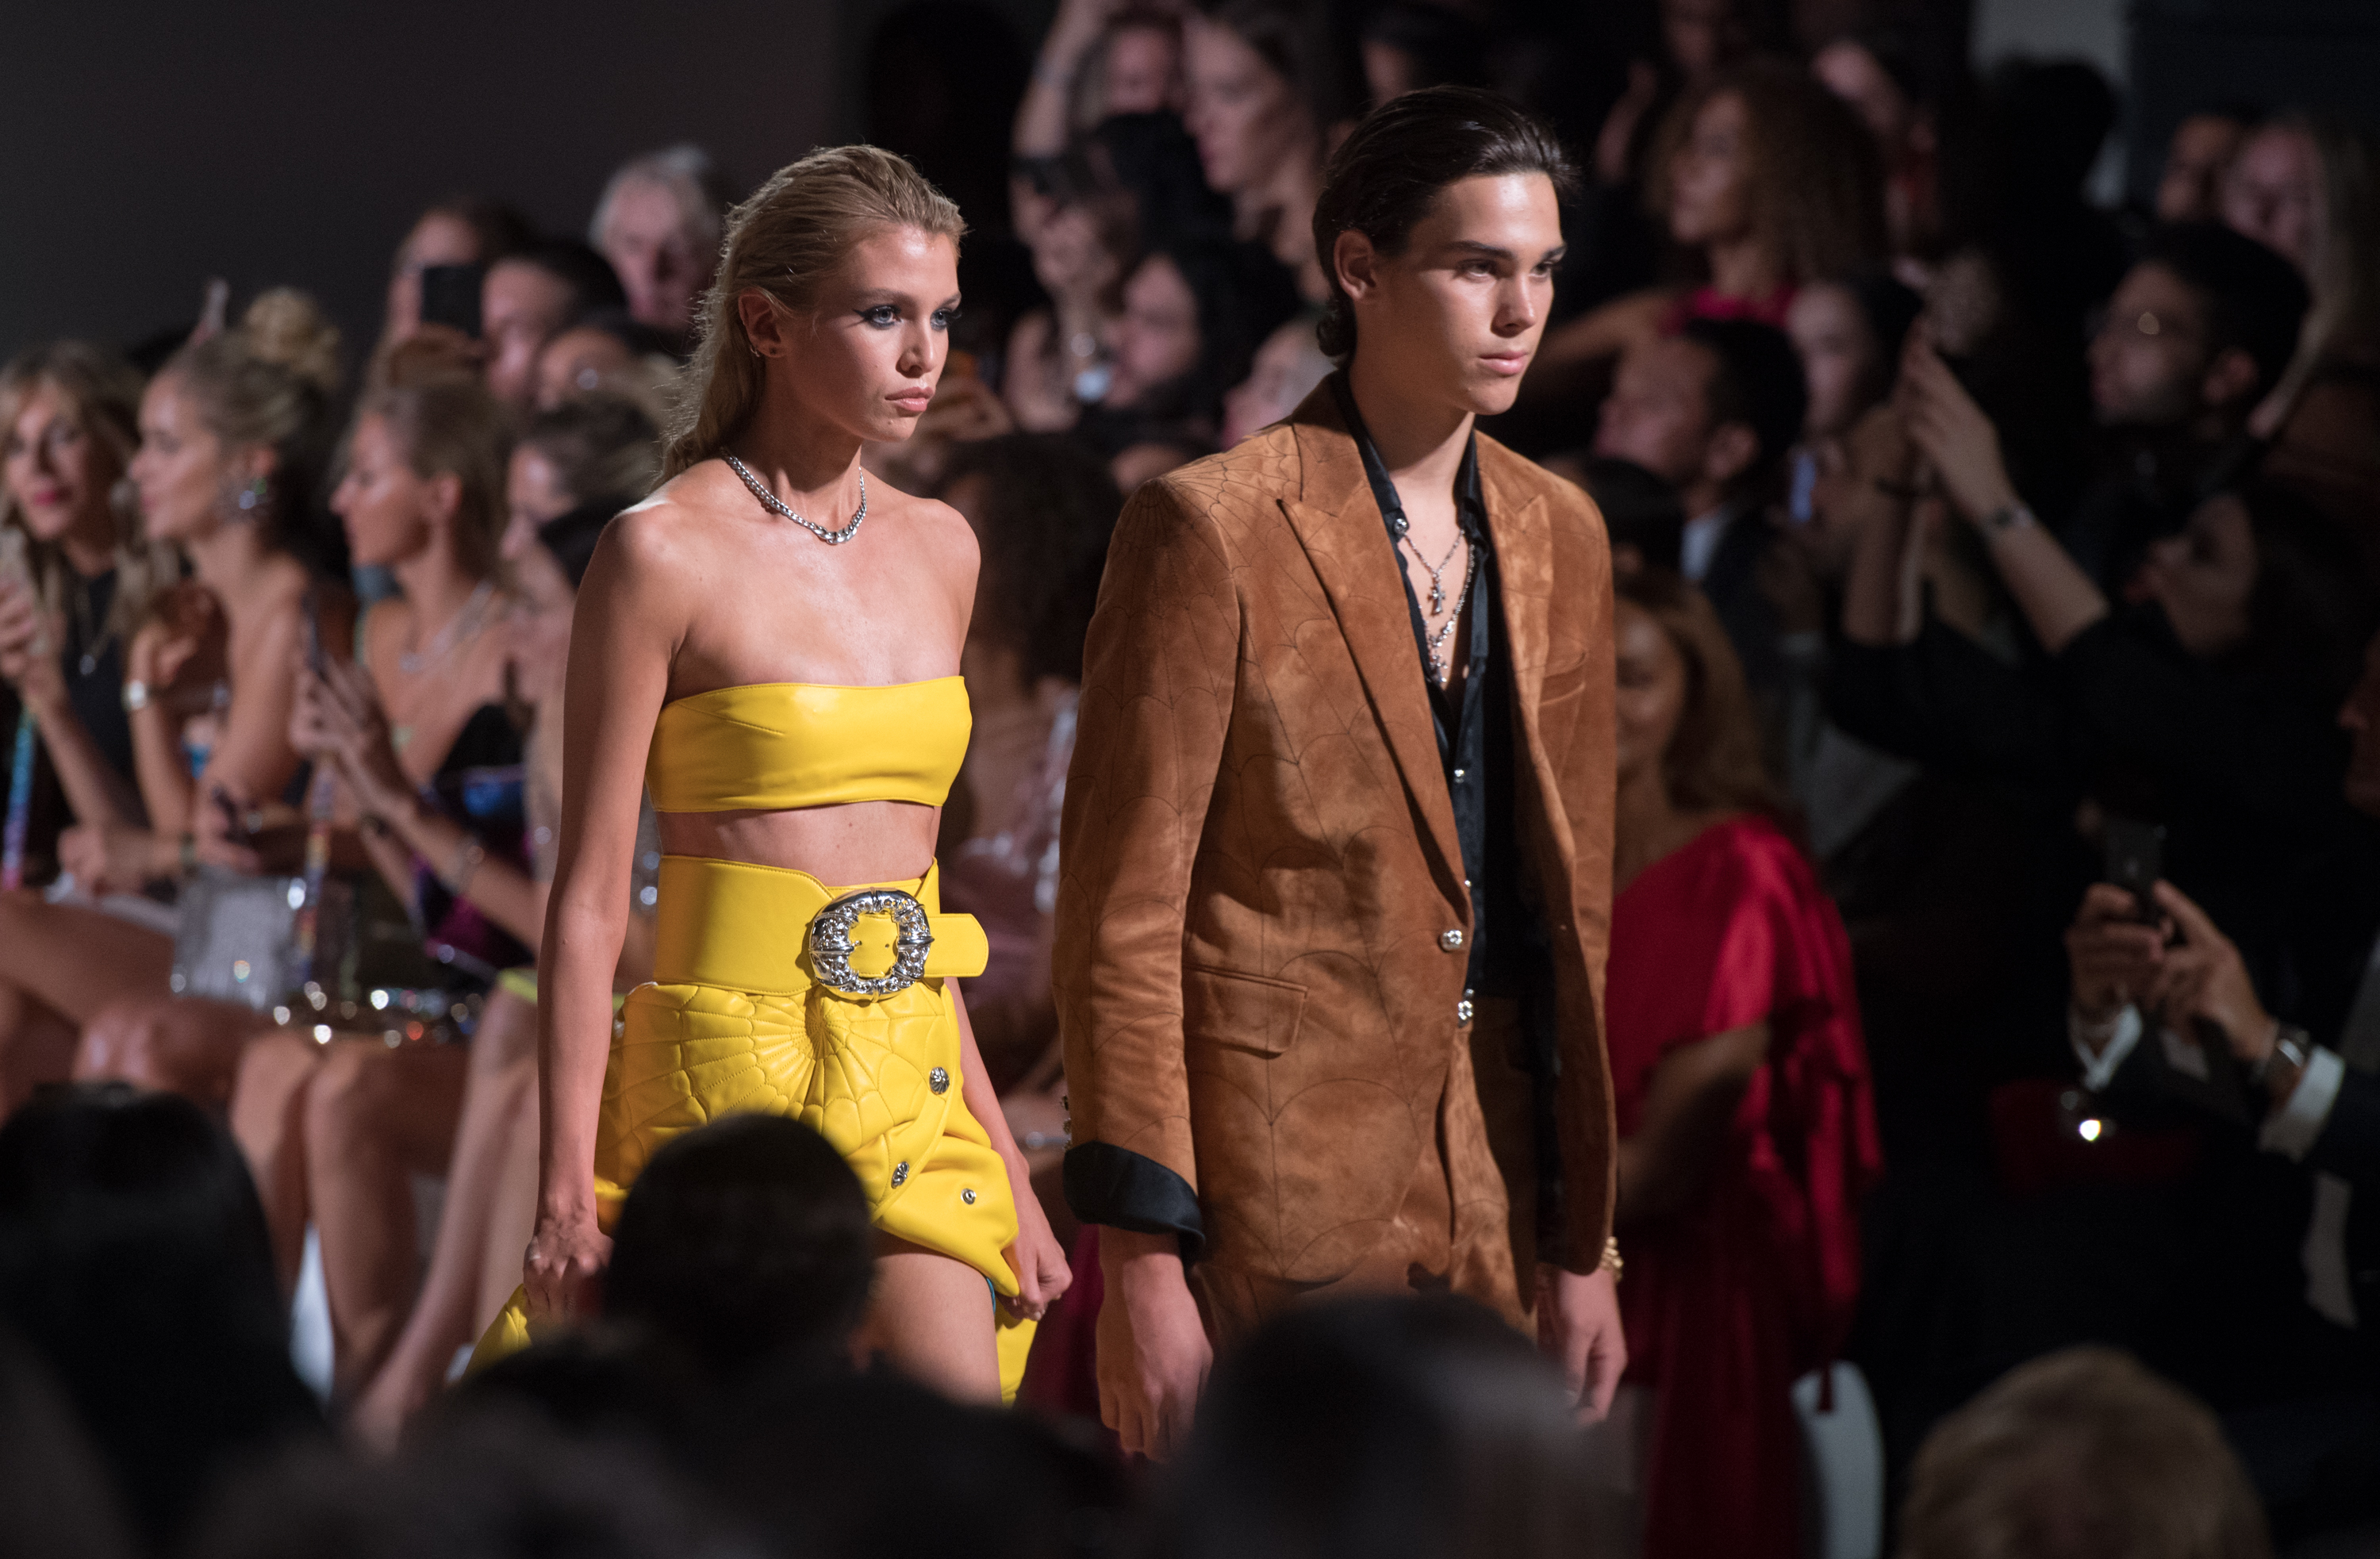 Stella Maxwell and Paris Brosnan walk the runway at the Fashion for Relief show during London Fashion Week 2019, on September 14, 2019, in London, England. | Source: Getty Images